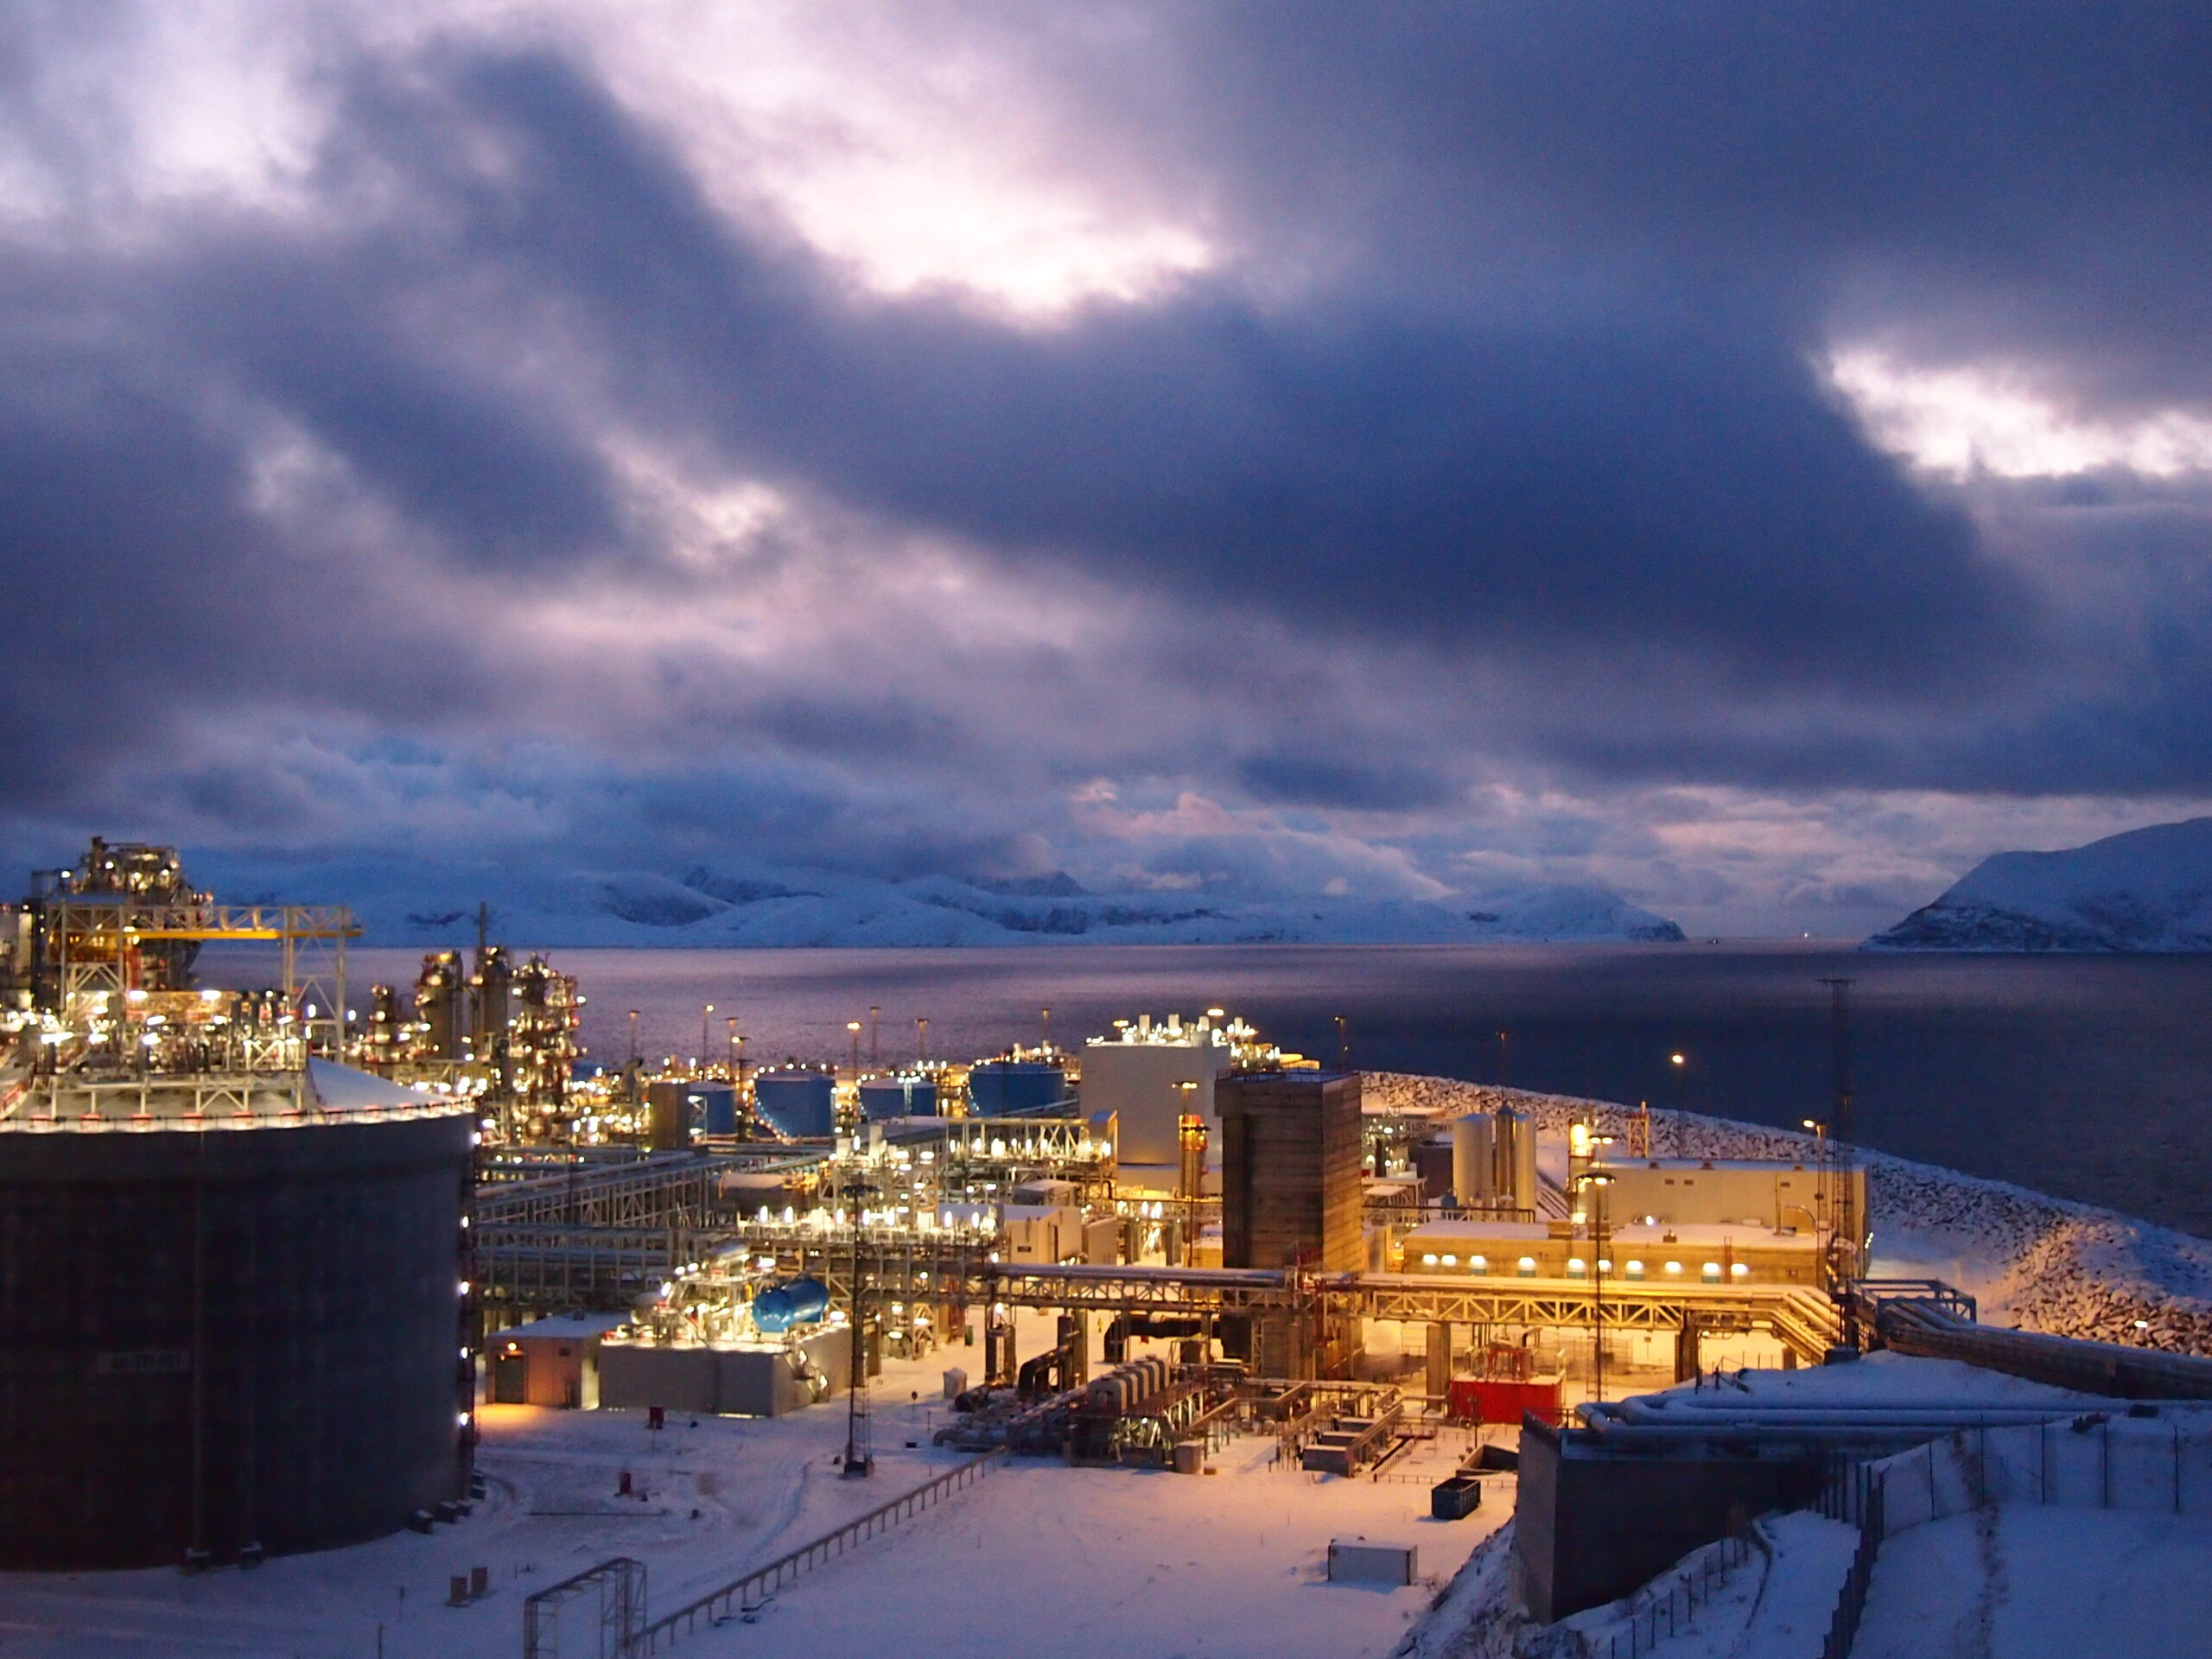 Arctic Report: How This Small Fishing Village Turned Into a Fossil Fuel Boomtown